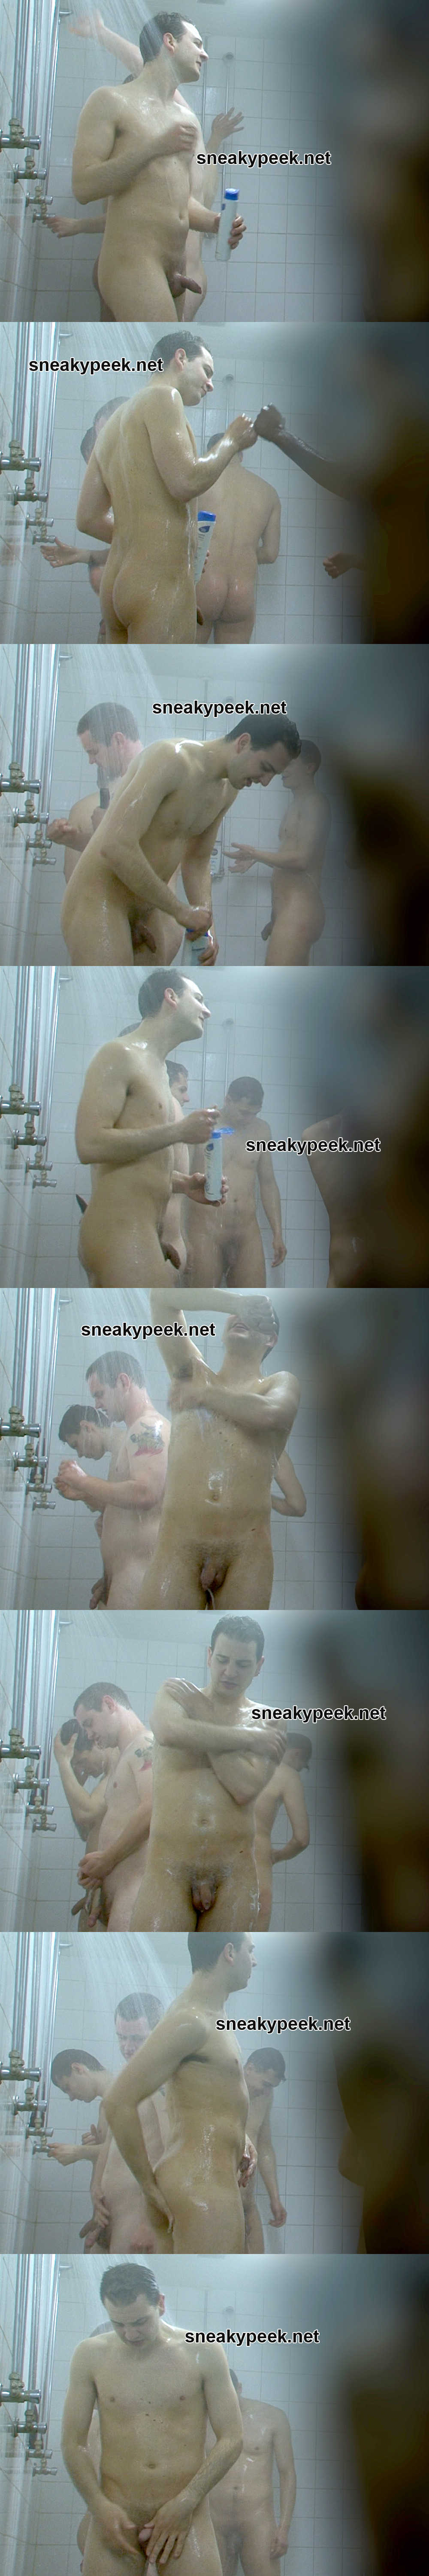 straight guys showering all together in a steamy communal shower room